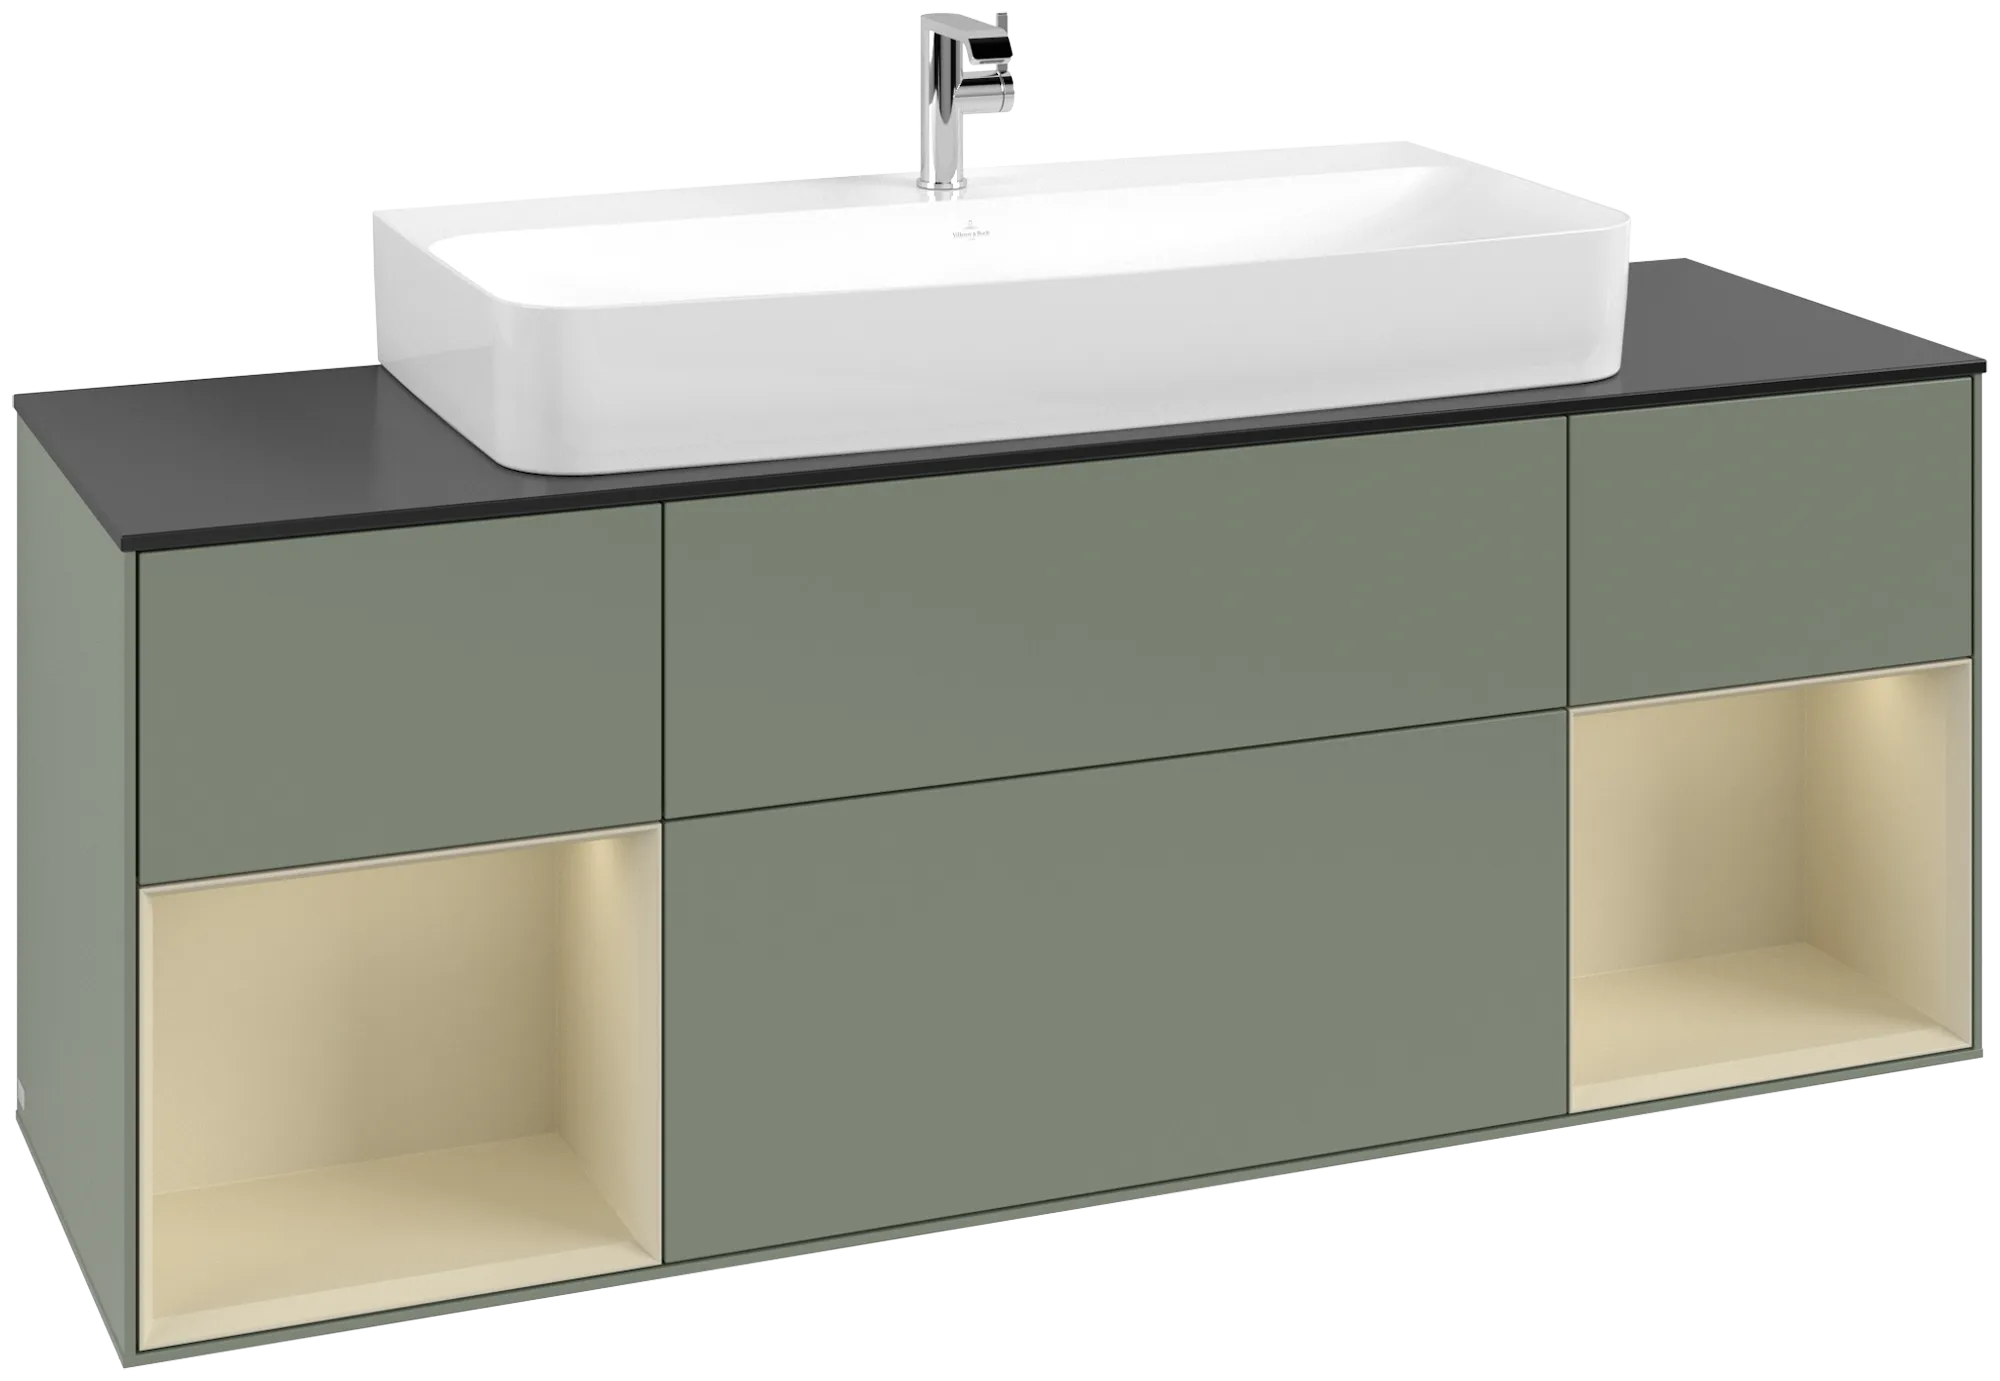 Picture of VILLEROY BOCH Finion Vanity unit, with lighting, 4 pull-out compartments, 1600 x 603 x 501 mm, Olive Matt Lacquer / Silk Grey Matt Lacquer / Glass Black Matt #G212HJGM